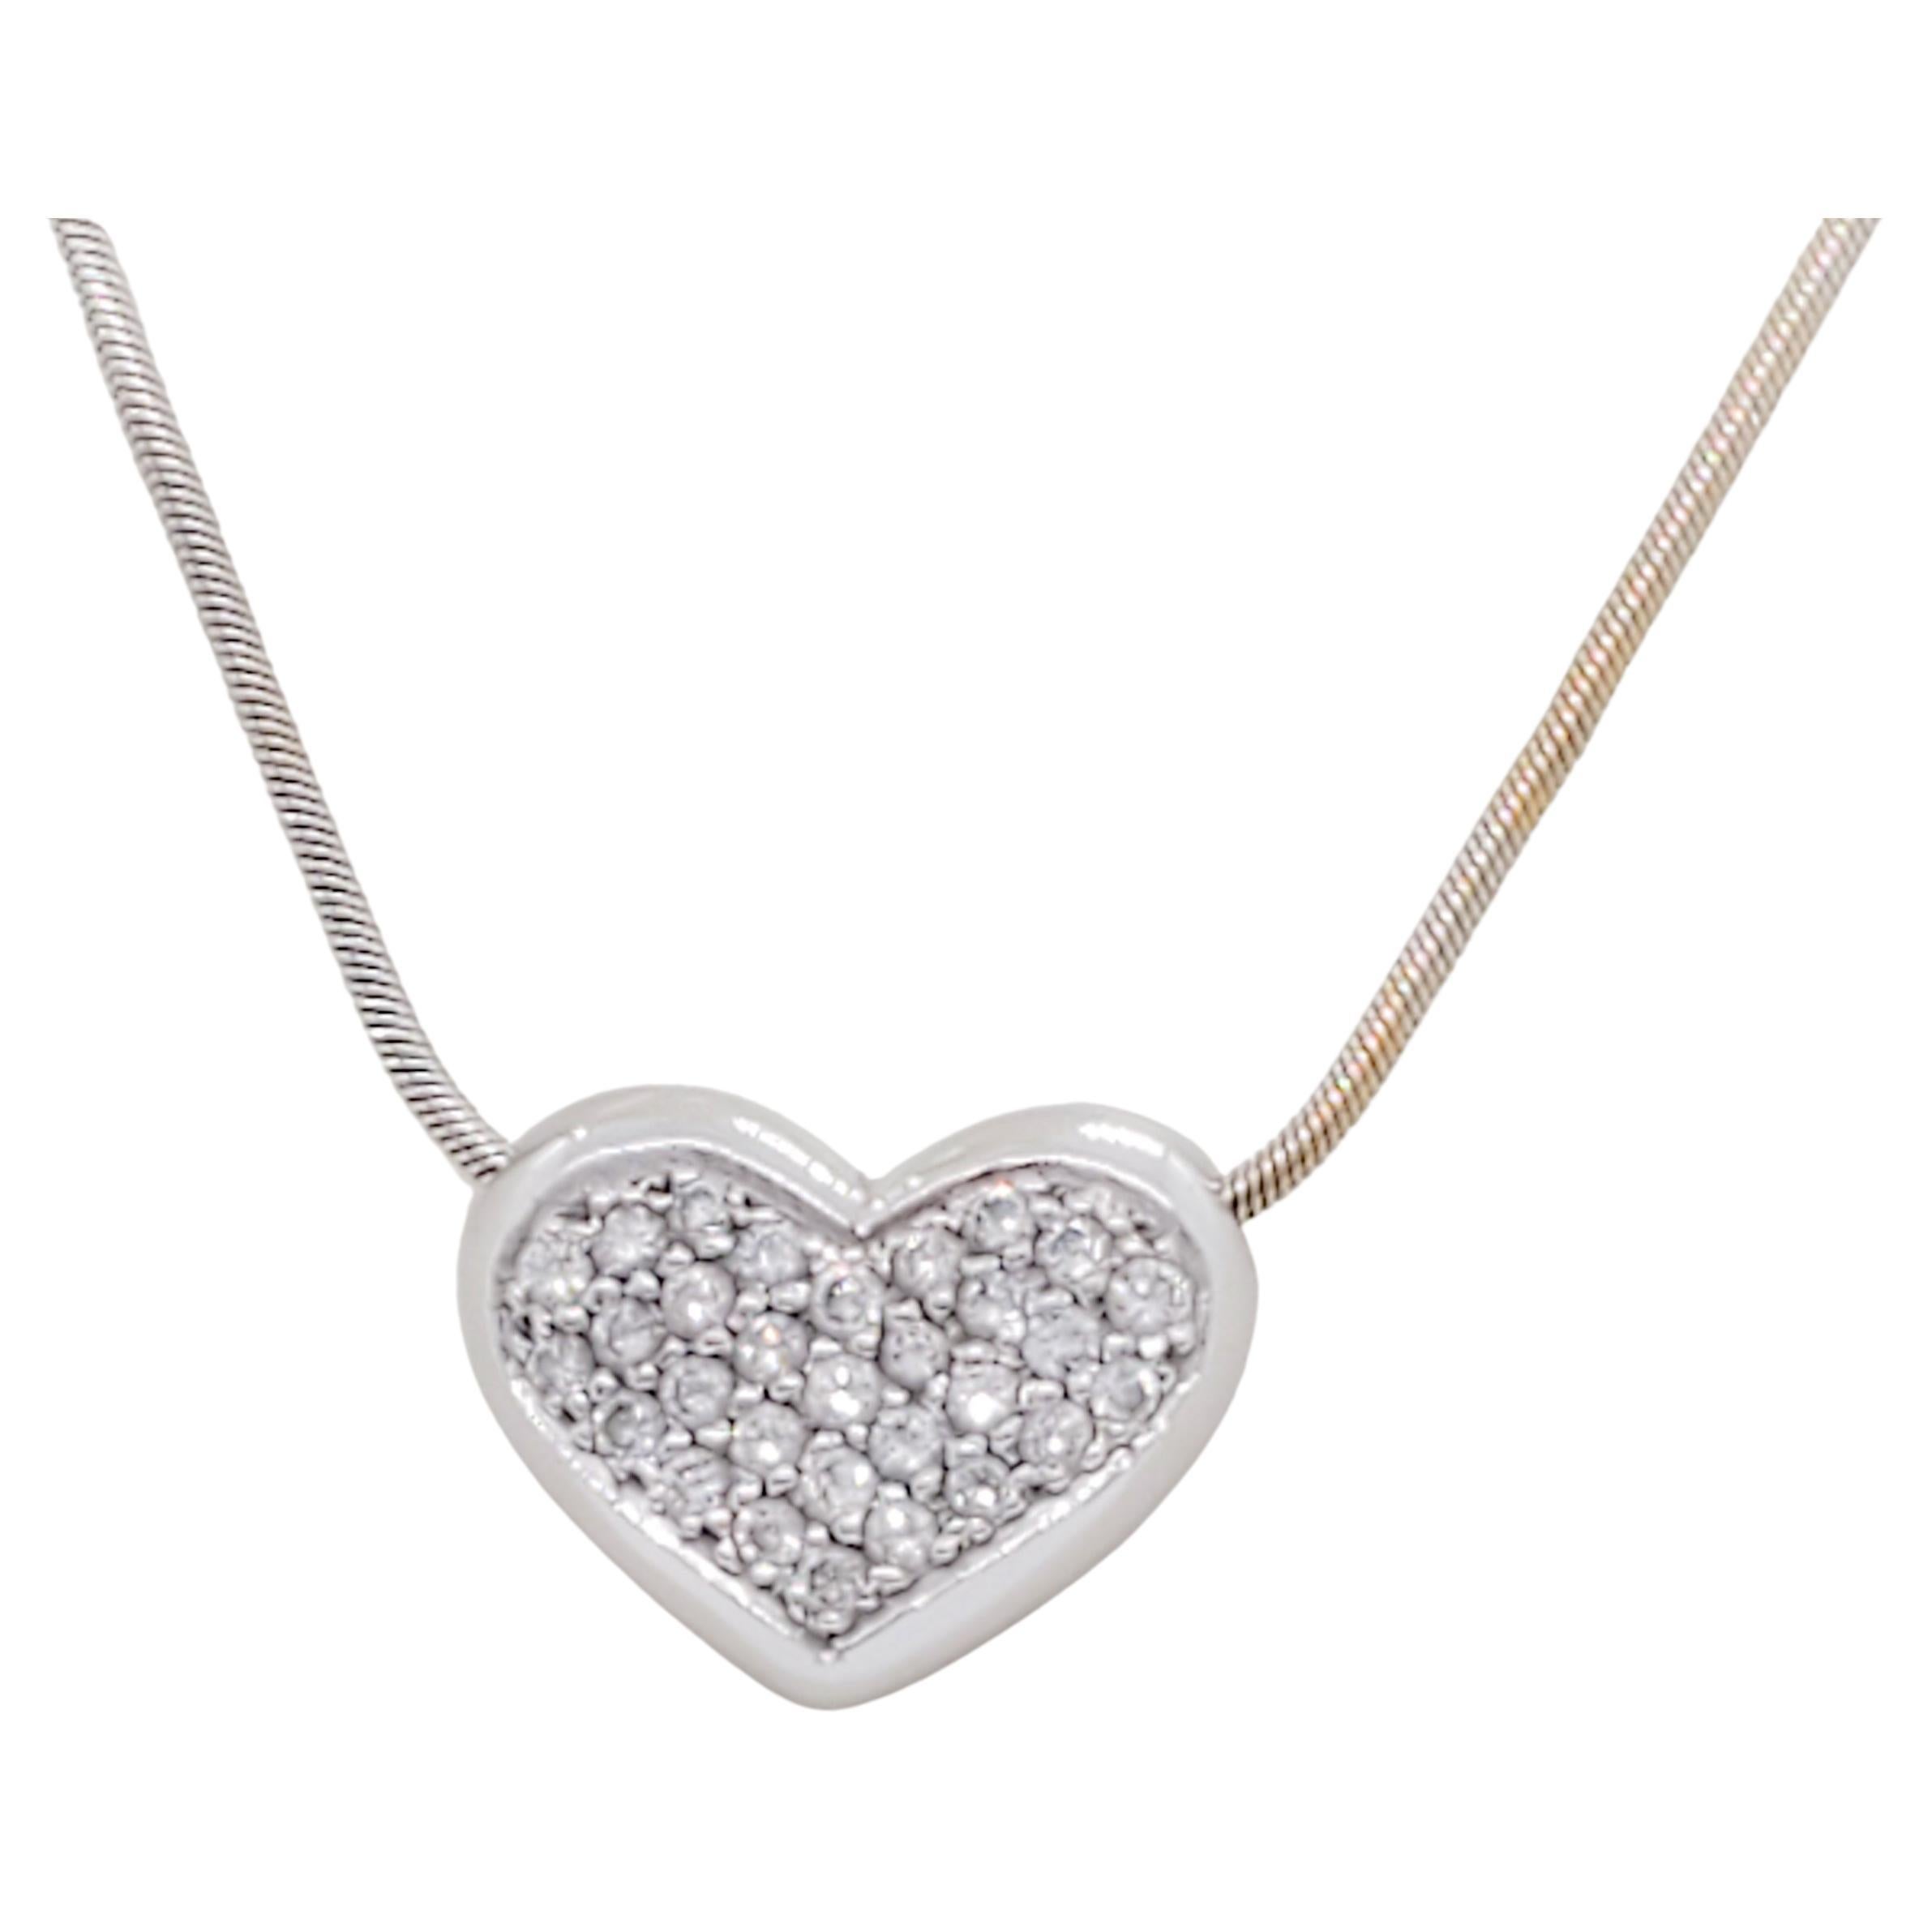 White Diamond Pave Heart Pendant Necklace in 18k Gold